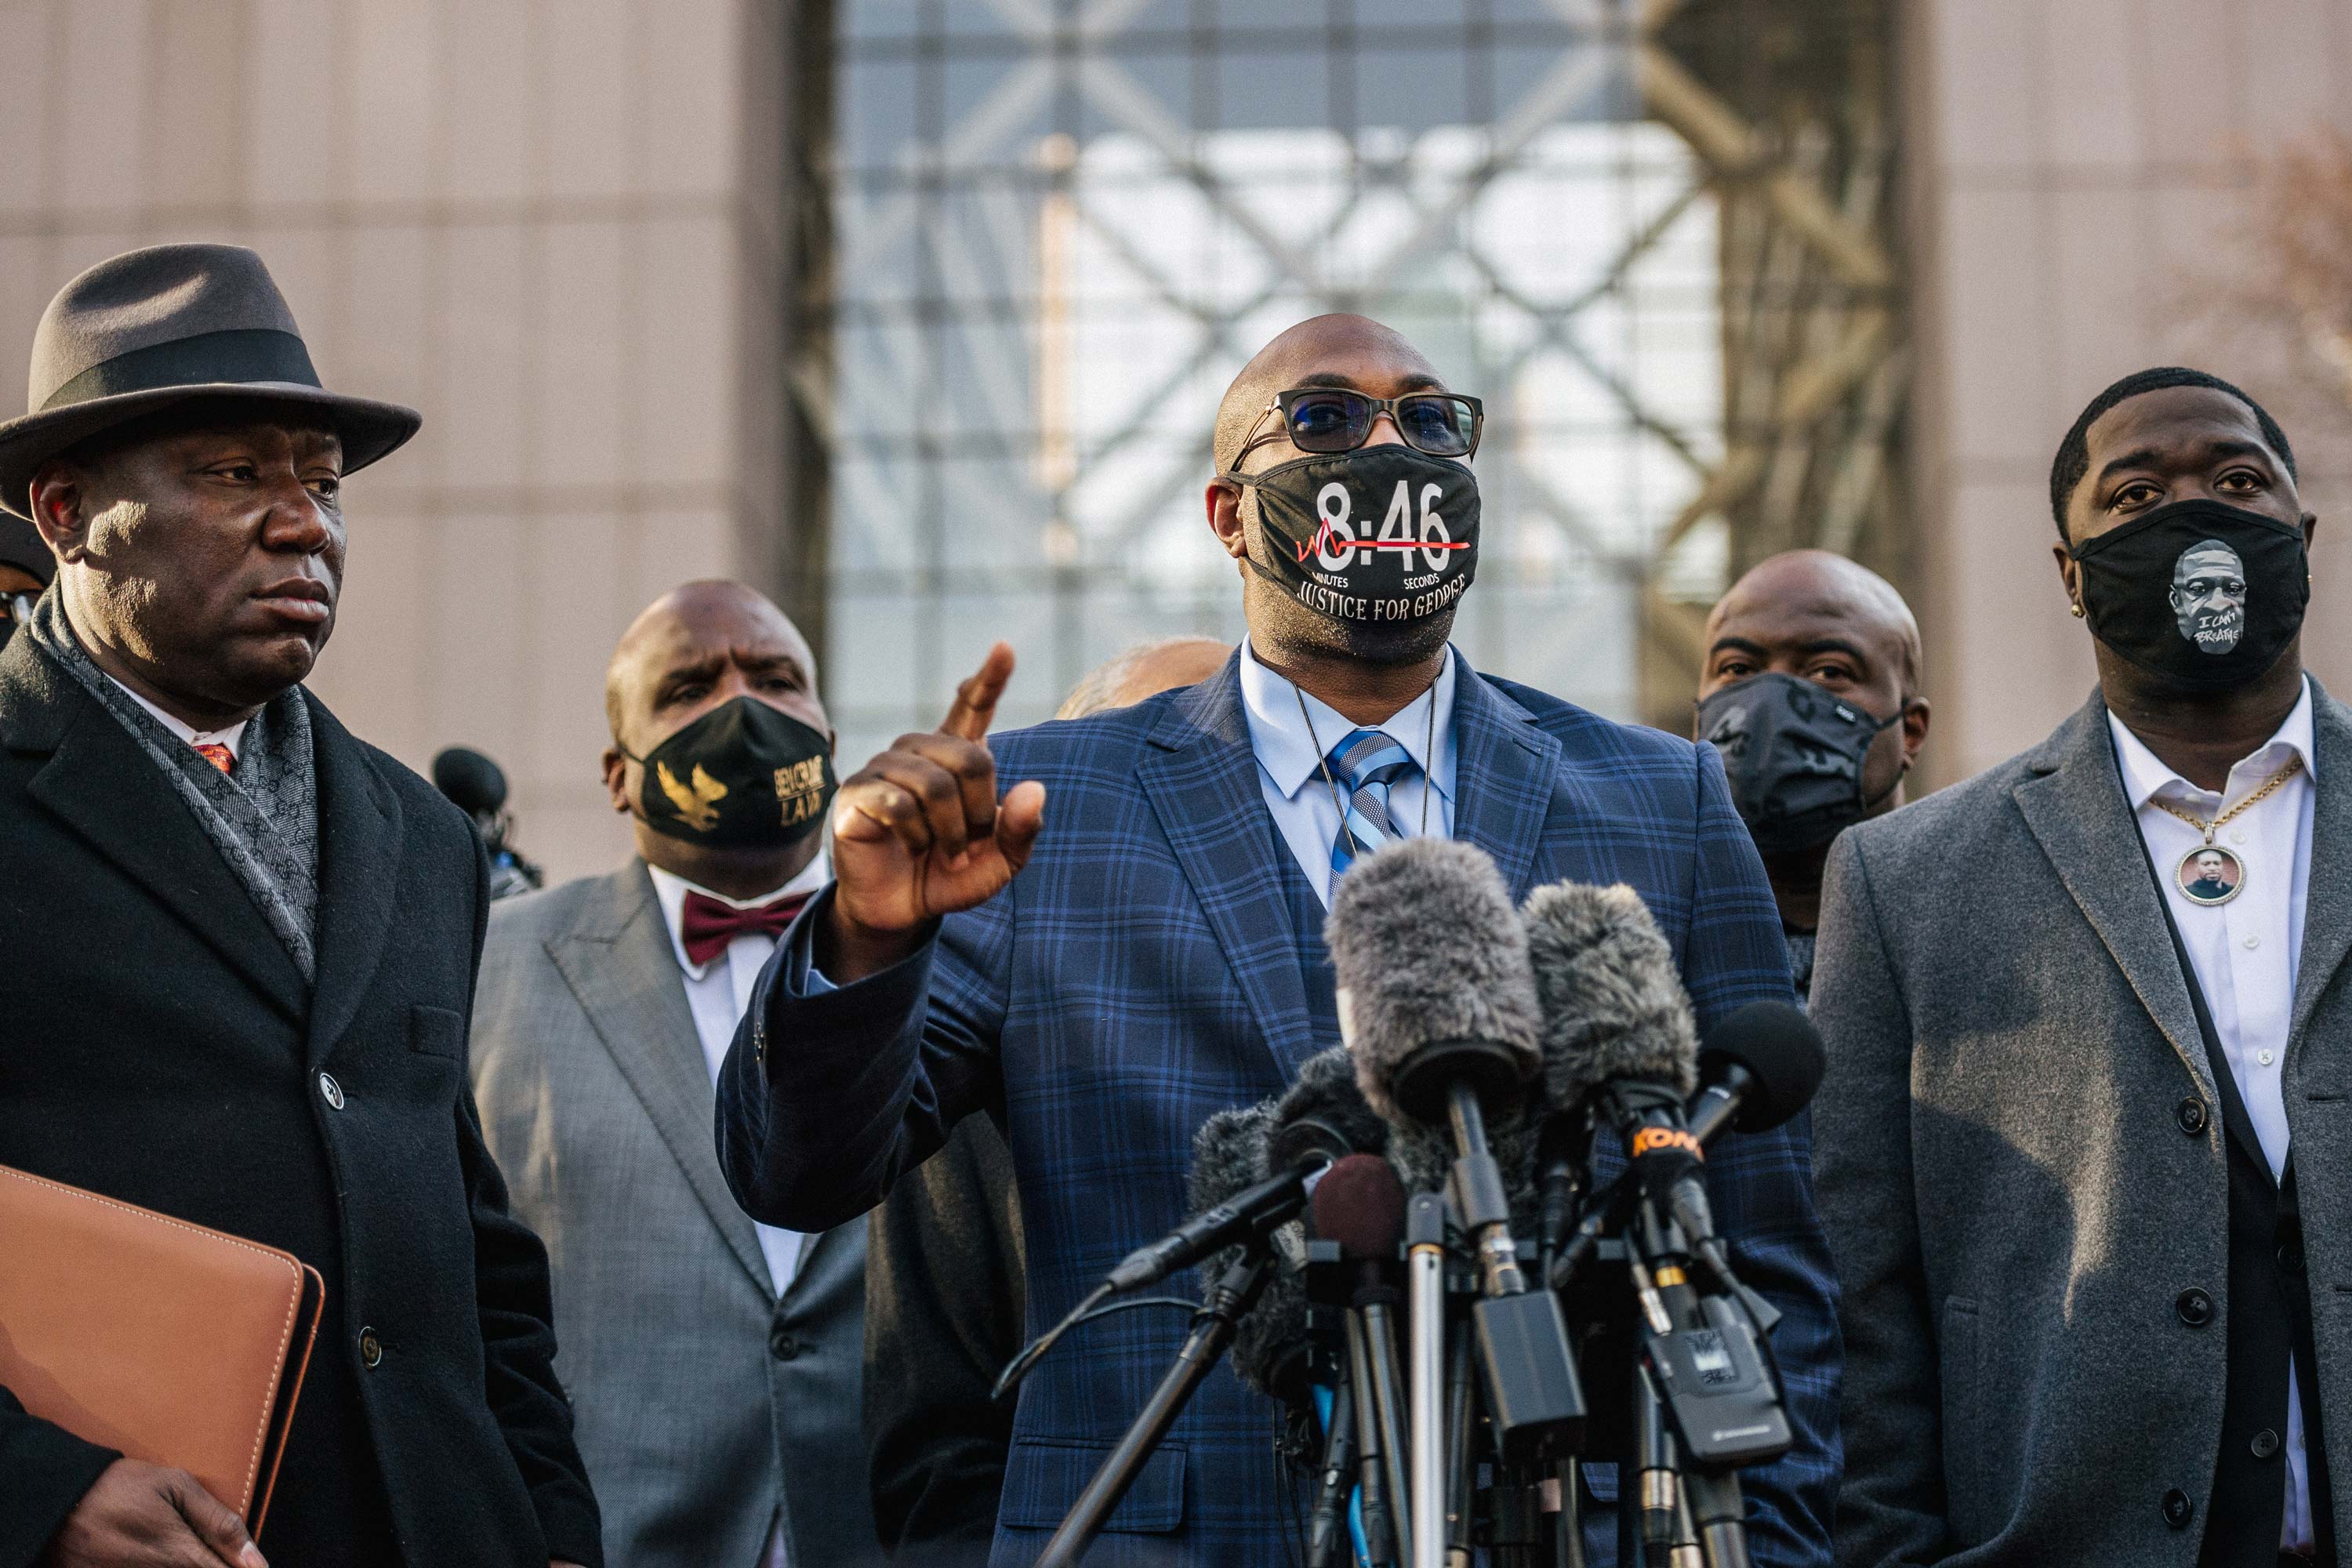 Philonise Floyd, brother of George Floyd, speaks alongside attorney Ben Crump, left, and Brandon Williams, nephew of George Floyd, right, during a news conference outside the Hennepin County Government Center on March 29 in Minneapolis, Minnesota. 